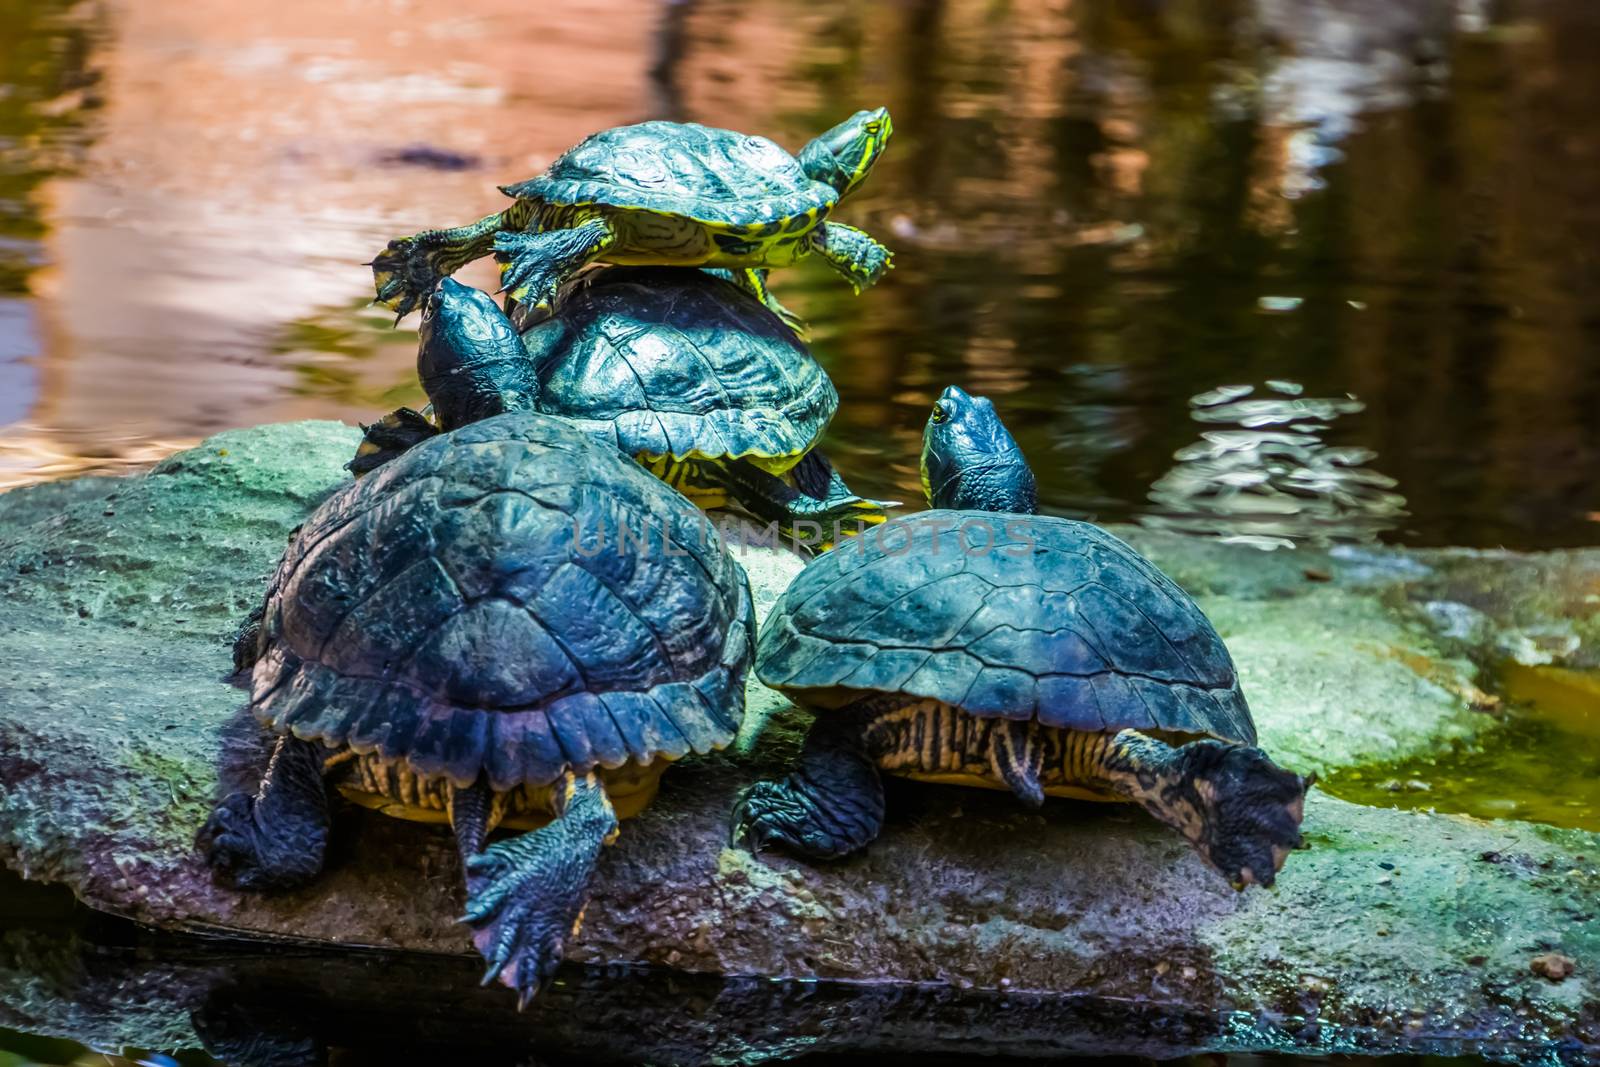 closeup of a cumberland slider turtle couple from the back at the water side together, tropical reptile specie from America by charlottebleijenberg